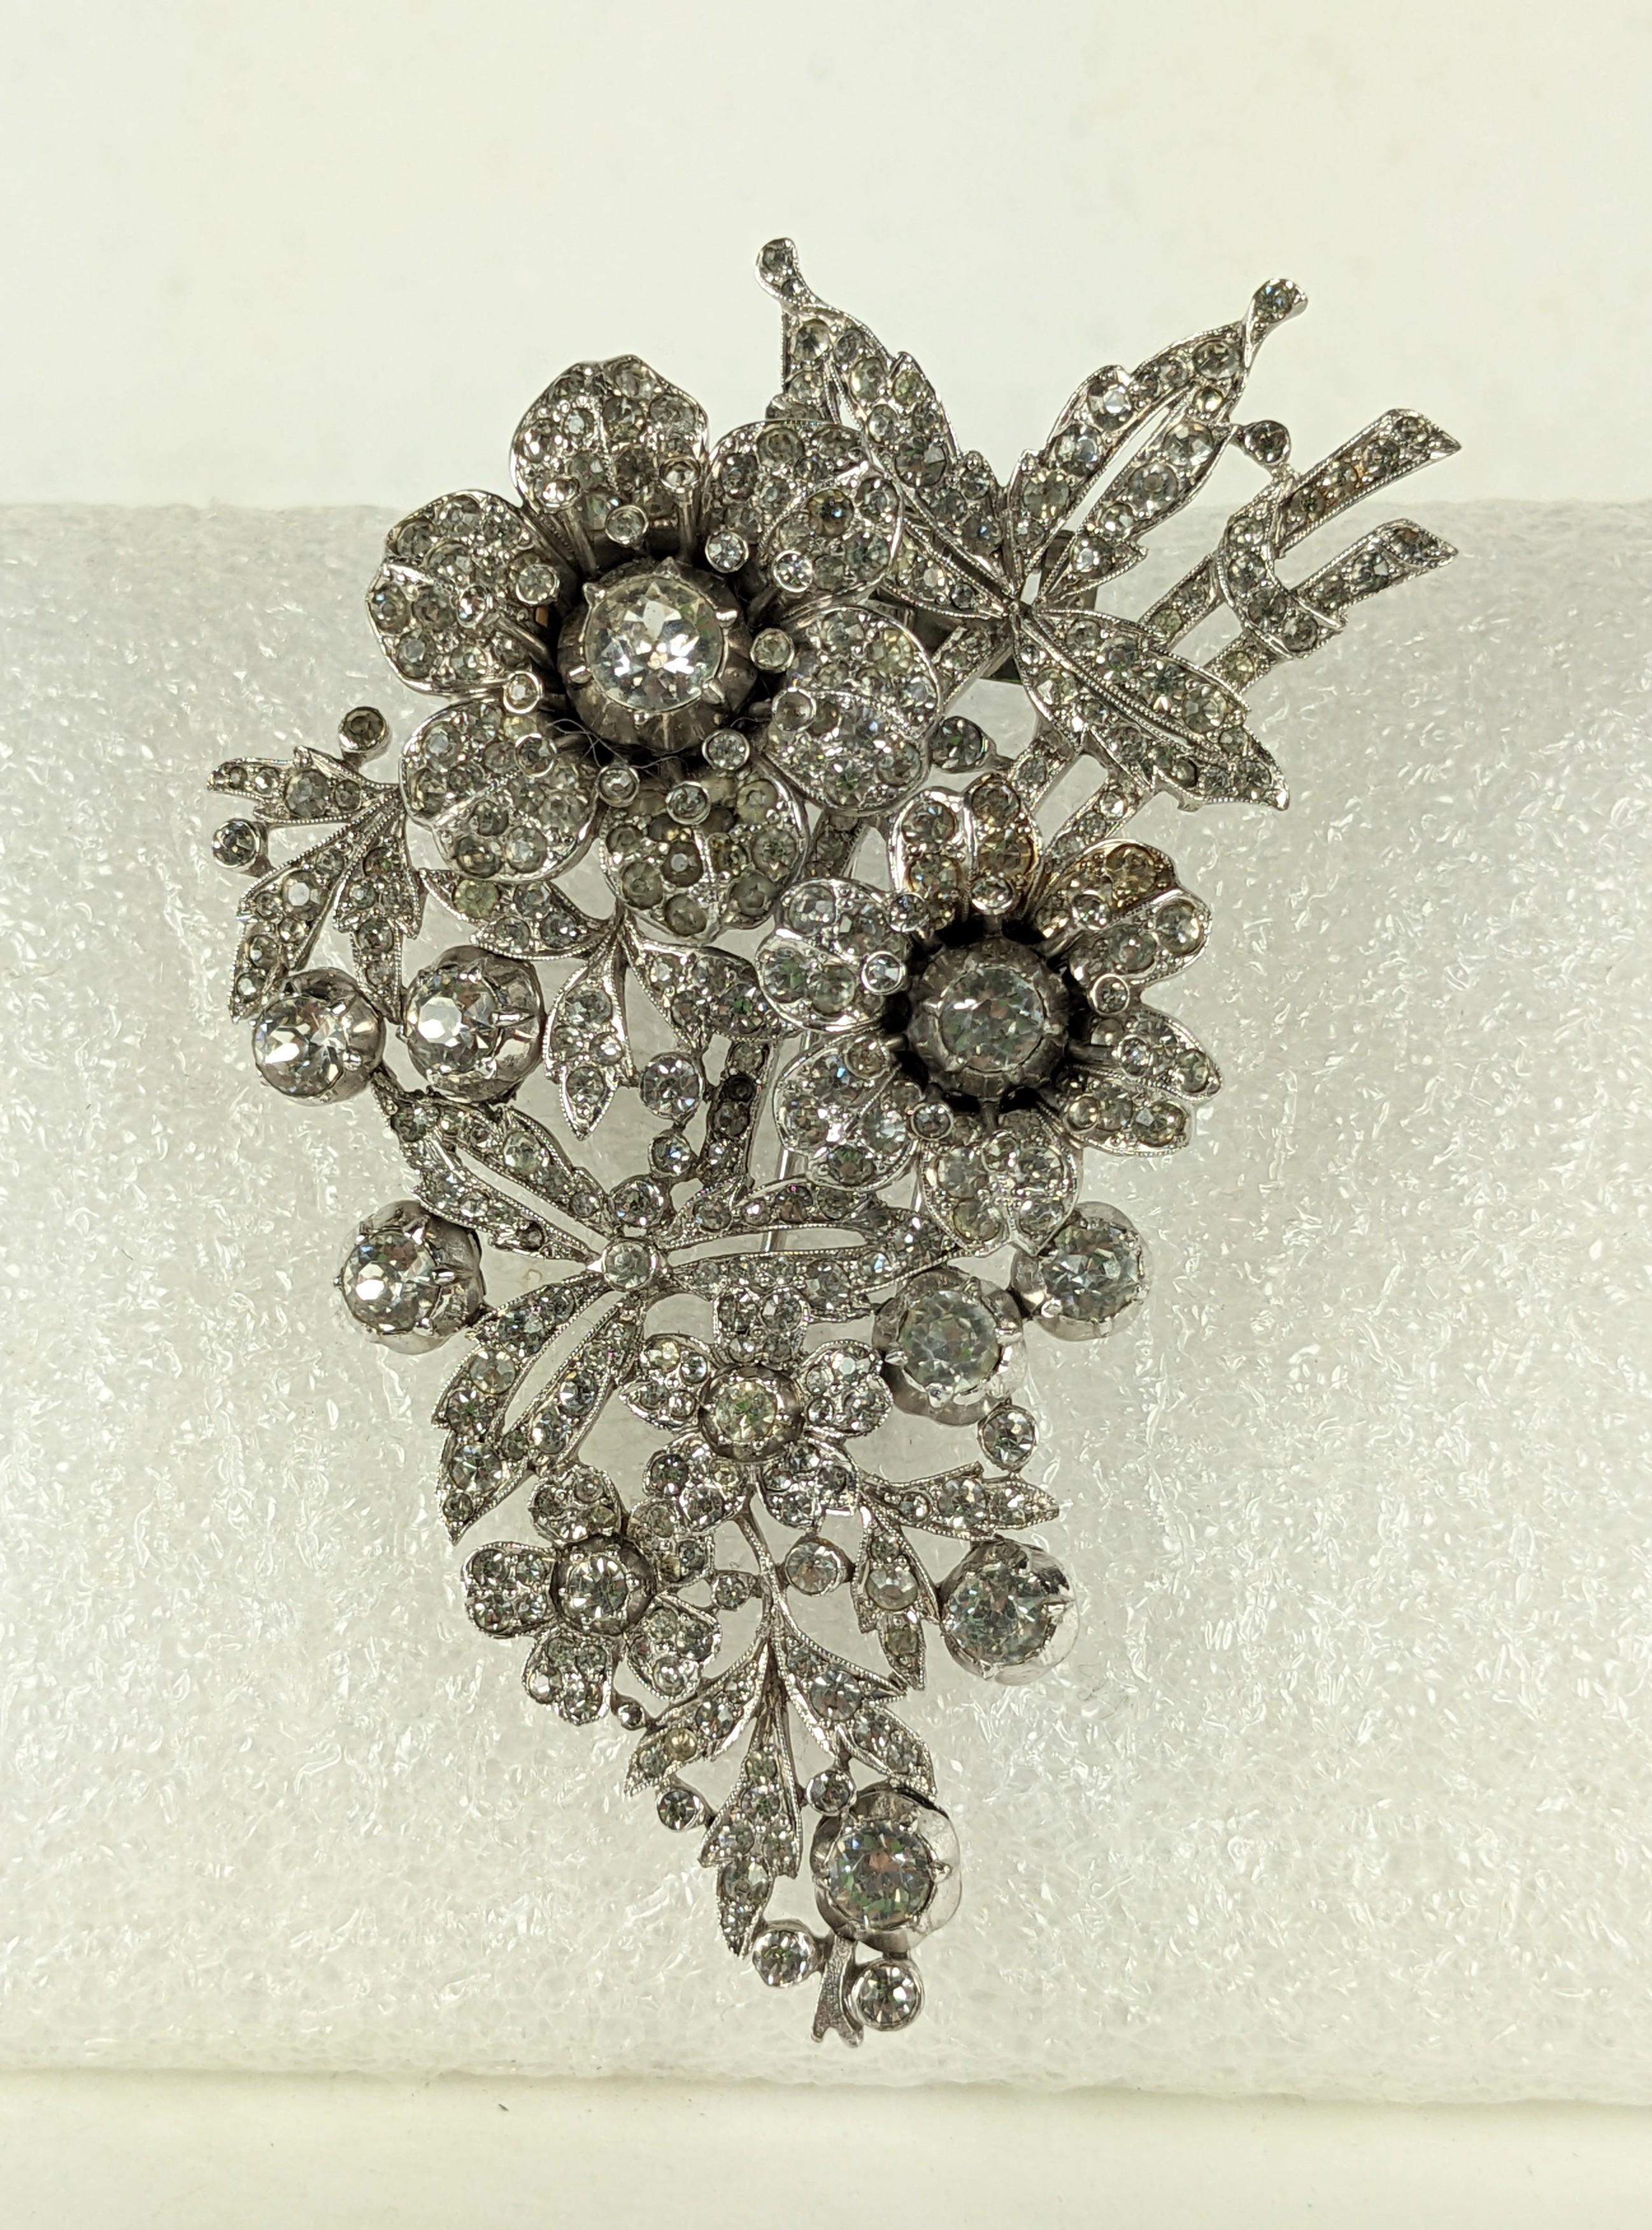 Rare Trifari Regence Series Tremblant Pave 18th Century Clip Brooch set in rhodium from the 1930's by Alfred Philippe. 2 pave set flowerheads are set on tremblers to move with wearer, set in an elaborate 18th Century floral diamond style. 3.5